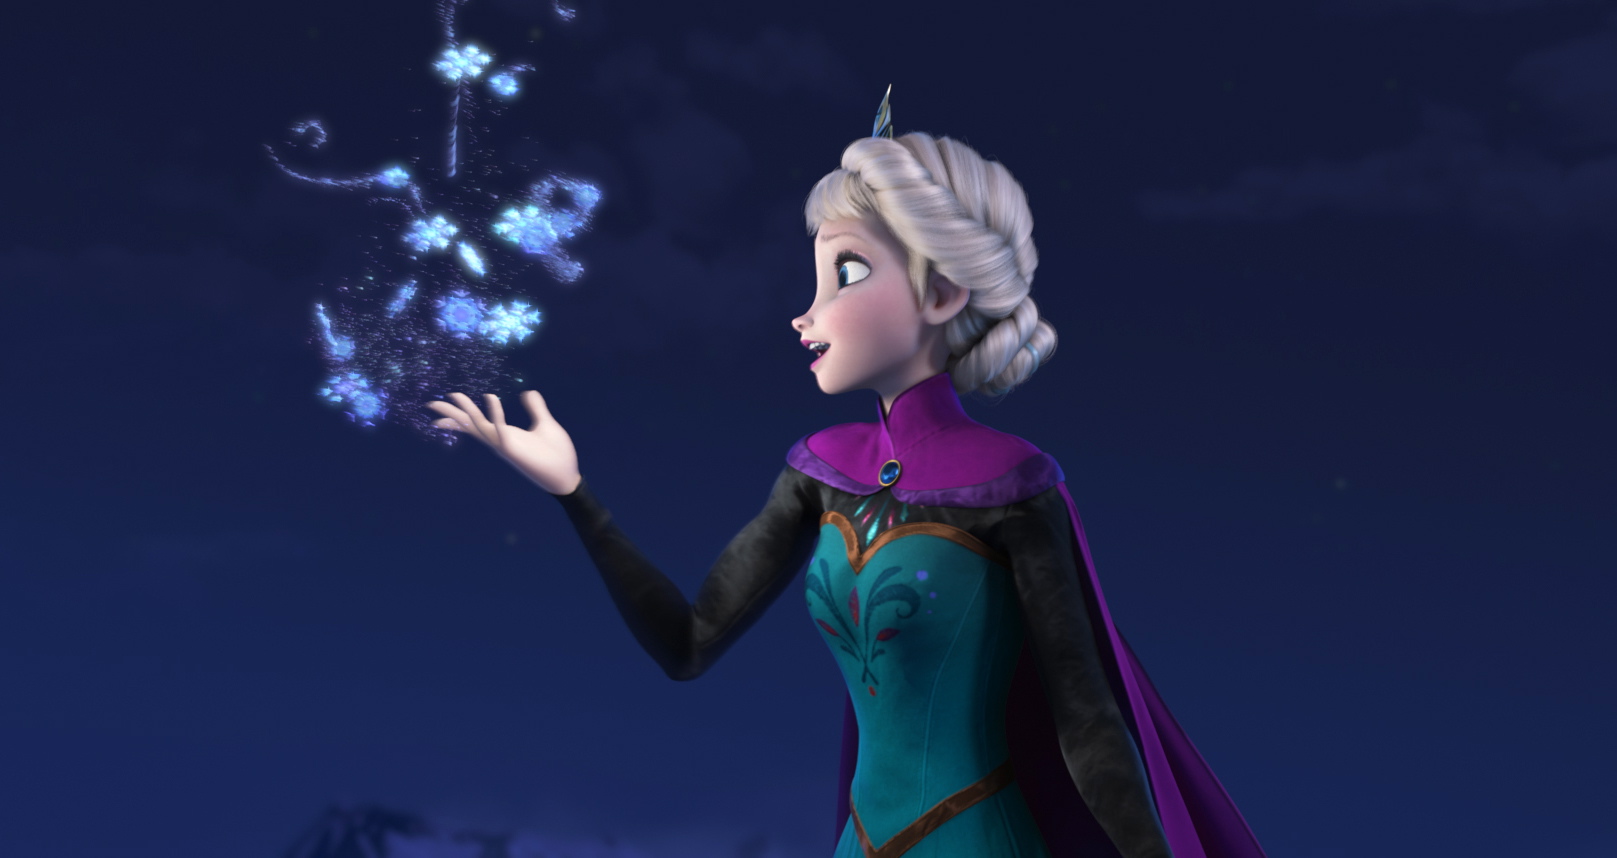 Disney
Elsa the Snow Queen, voiced by Idina Menzel, in a scene from Disney's animated feature &quot;Frozen.&quot;